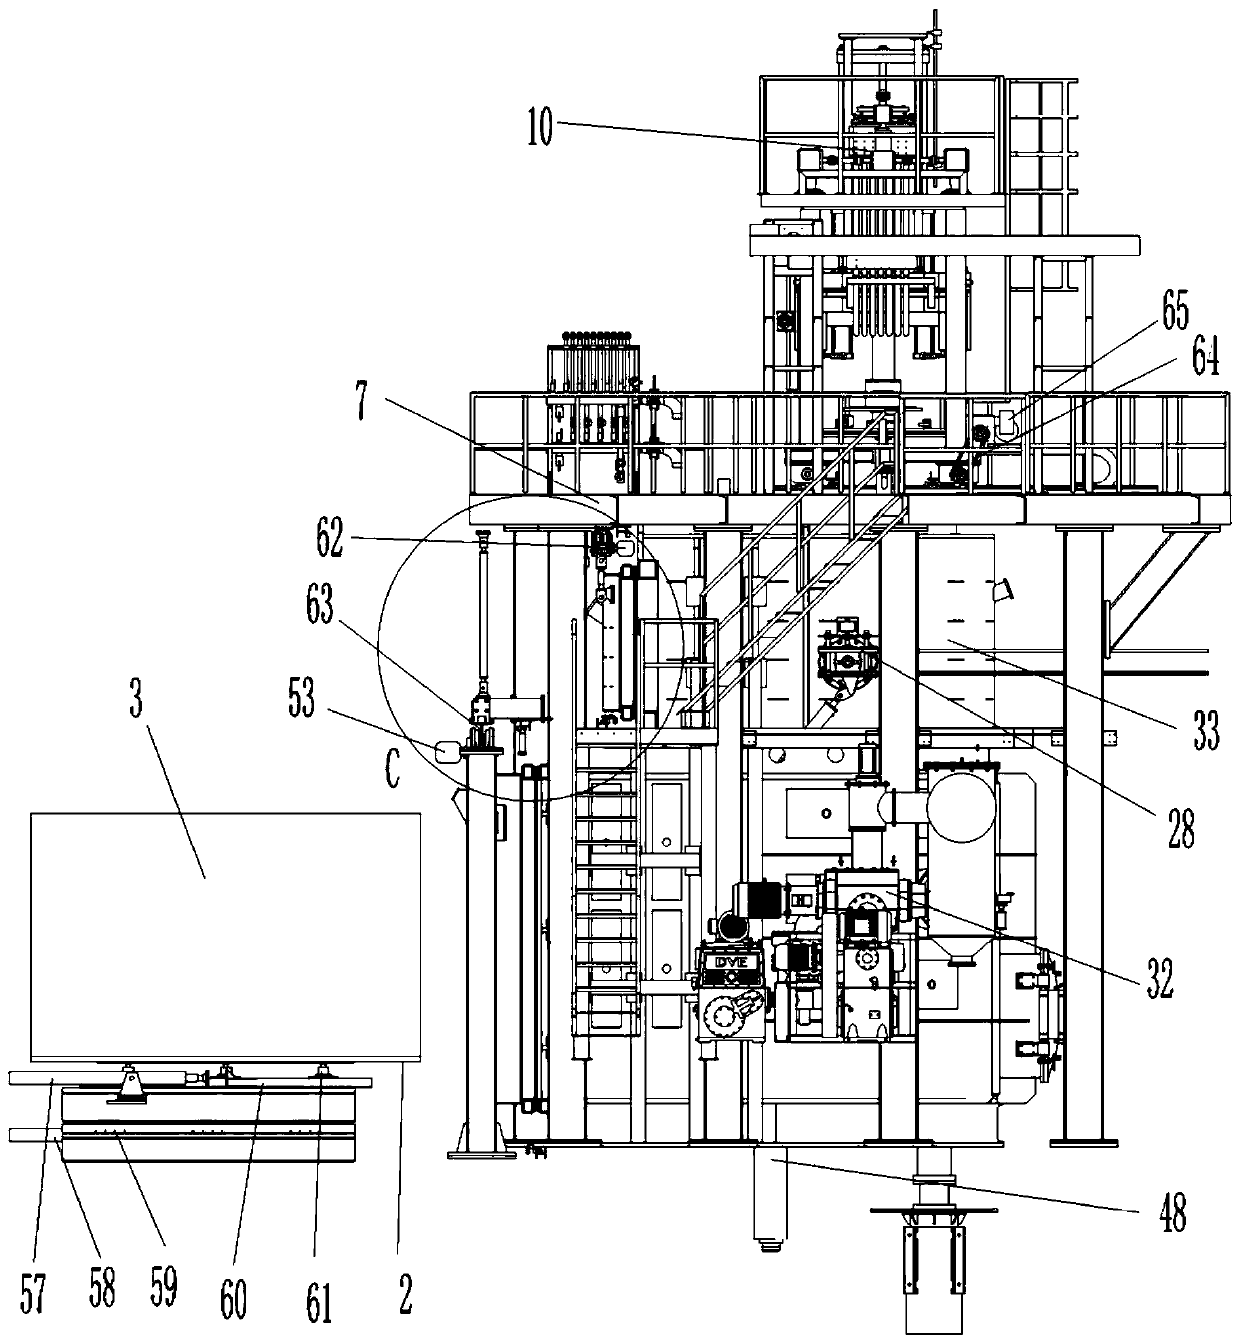 Double-chamber u-shaped furnace body system for shell solidification furnace